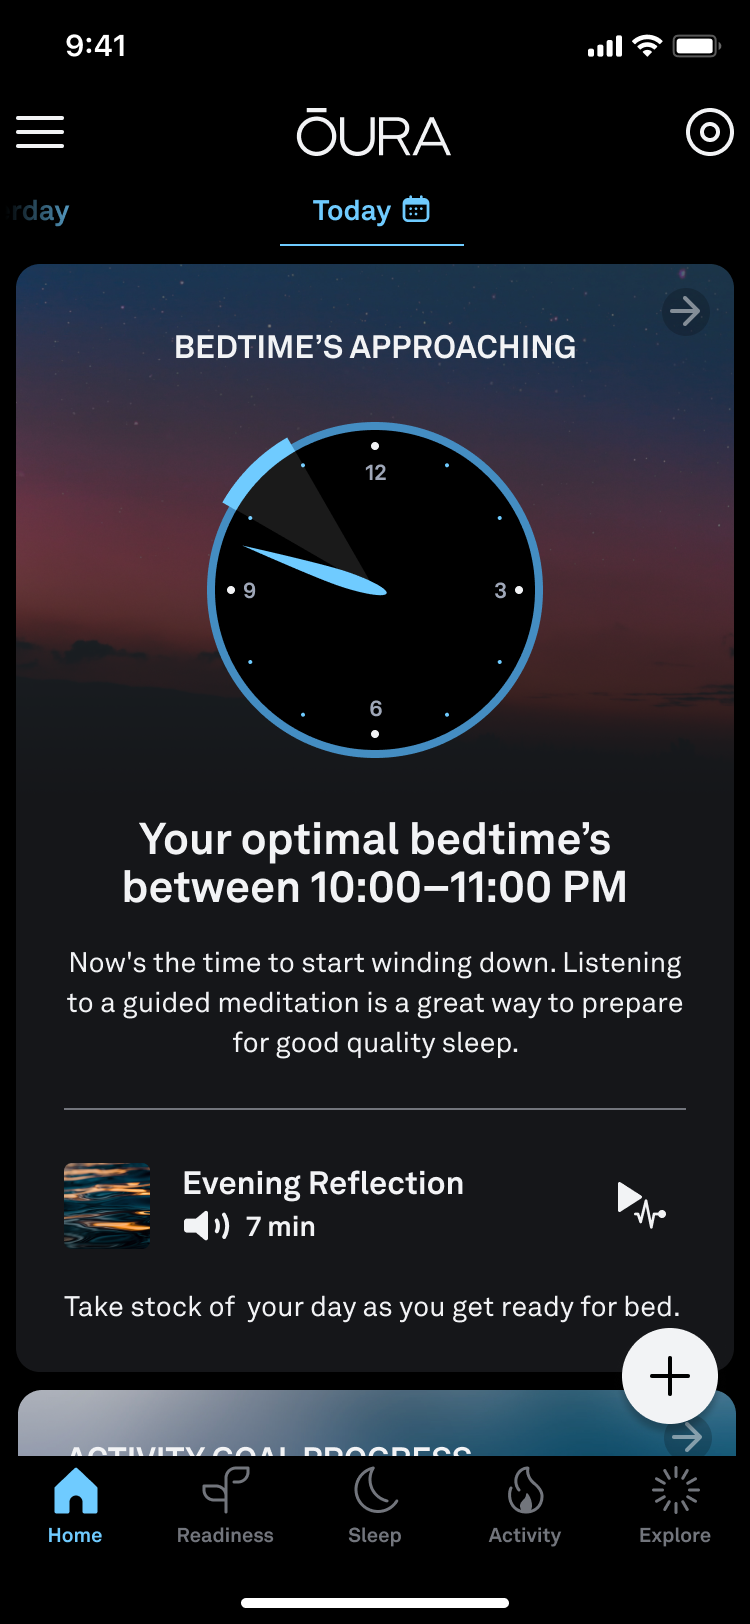 Bedtime guidance card on the app home screen